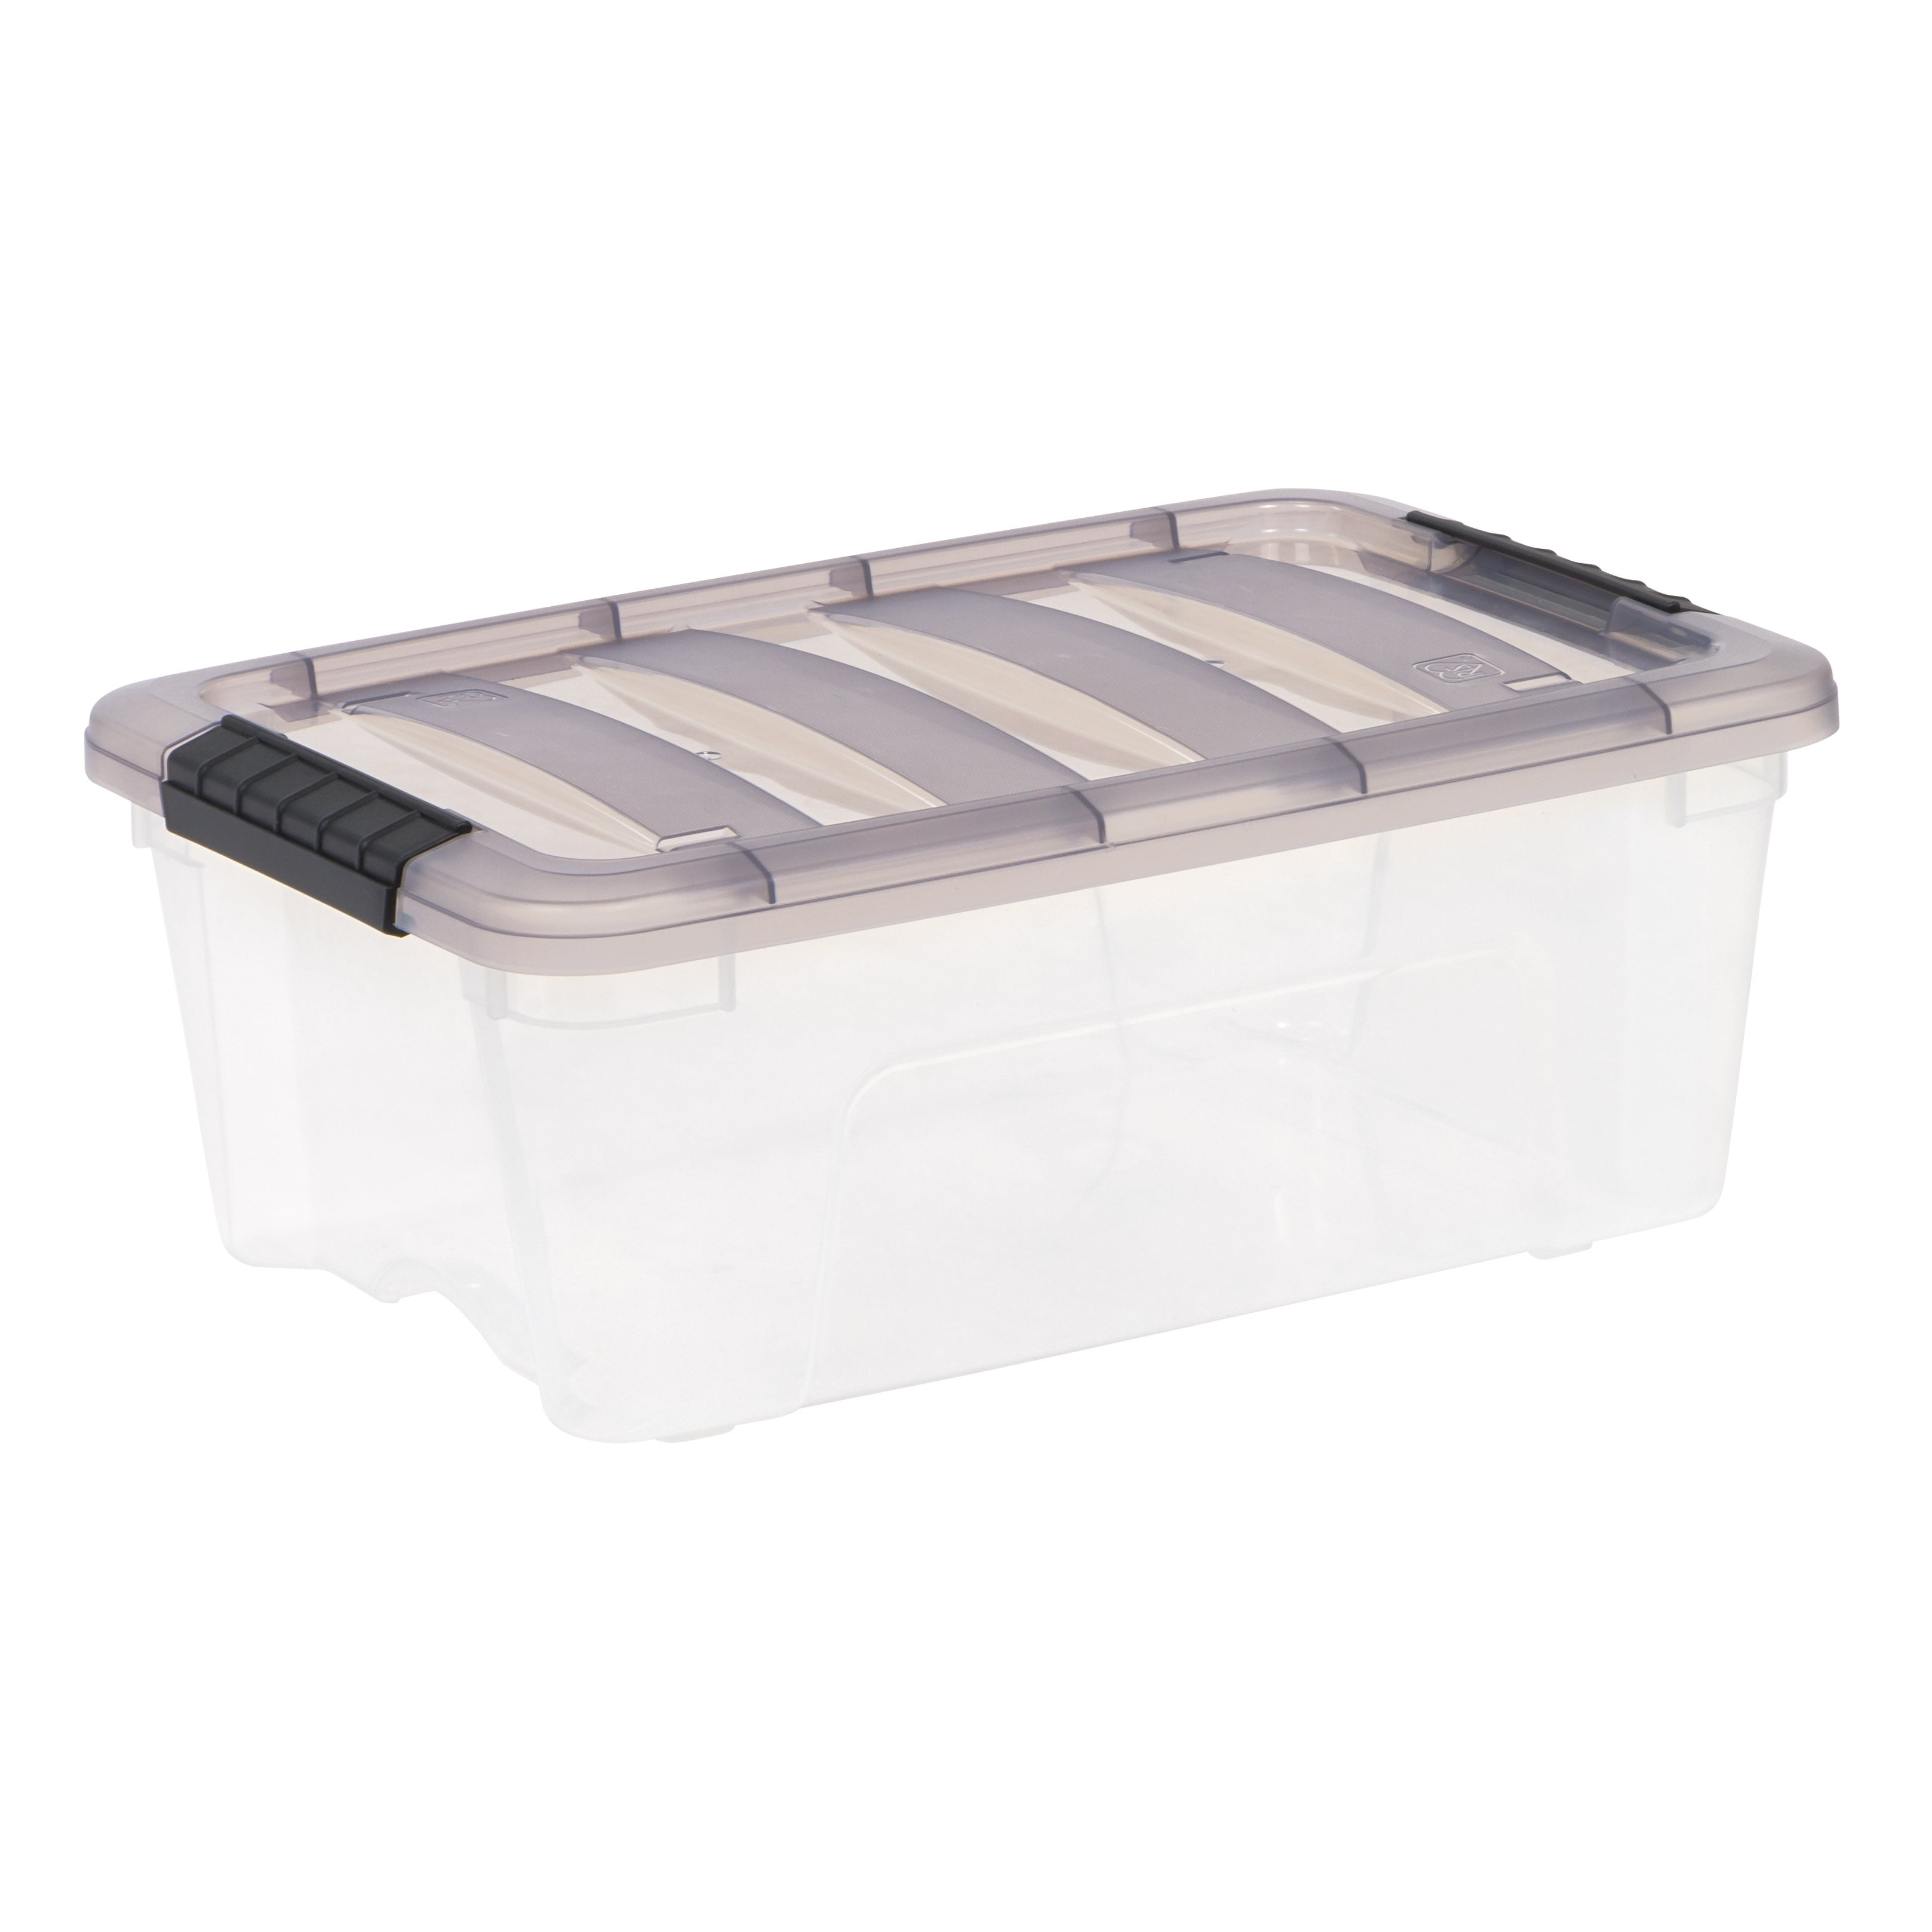 AVUX Stackable Storage Bin with Lid – A Pack of 3 Green Colored